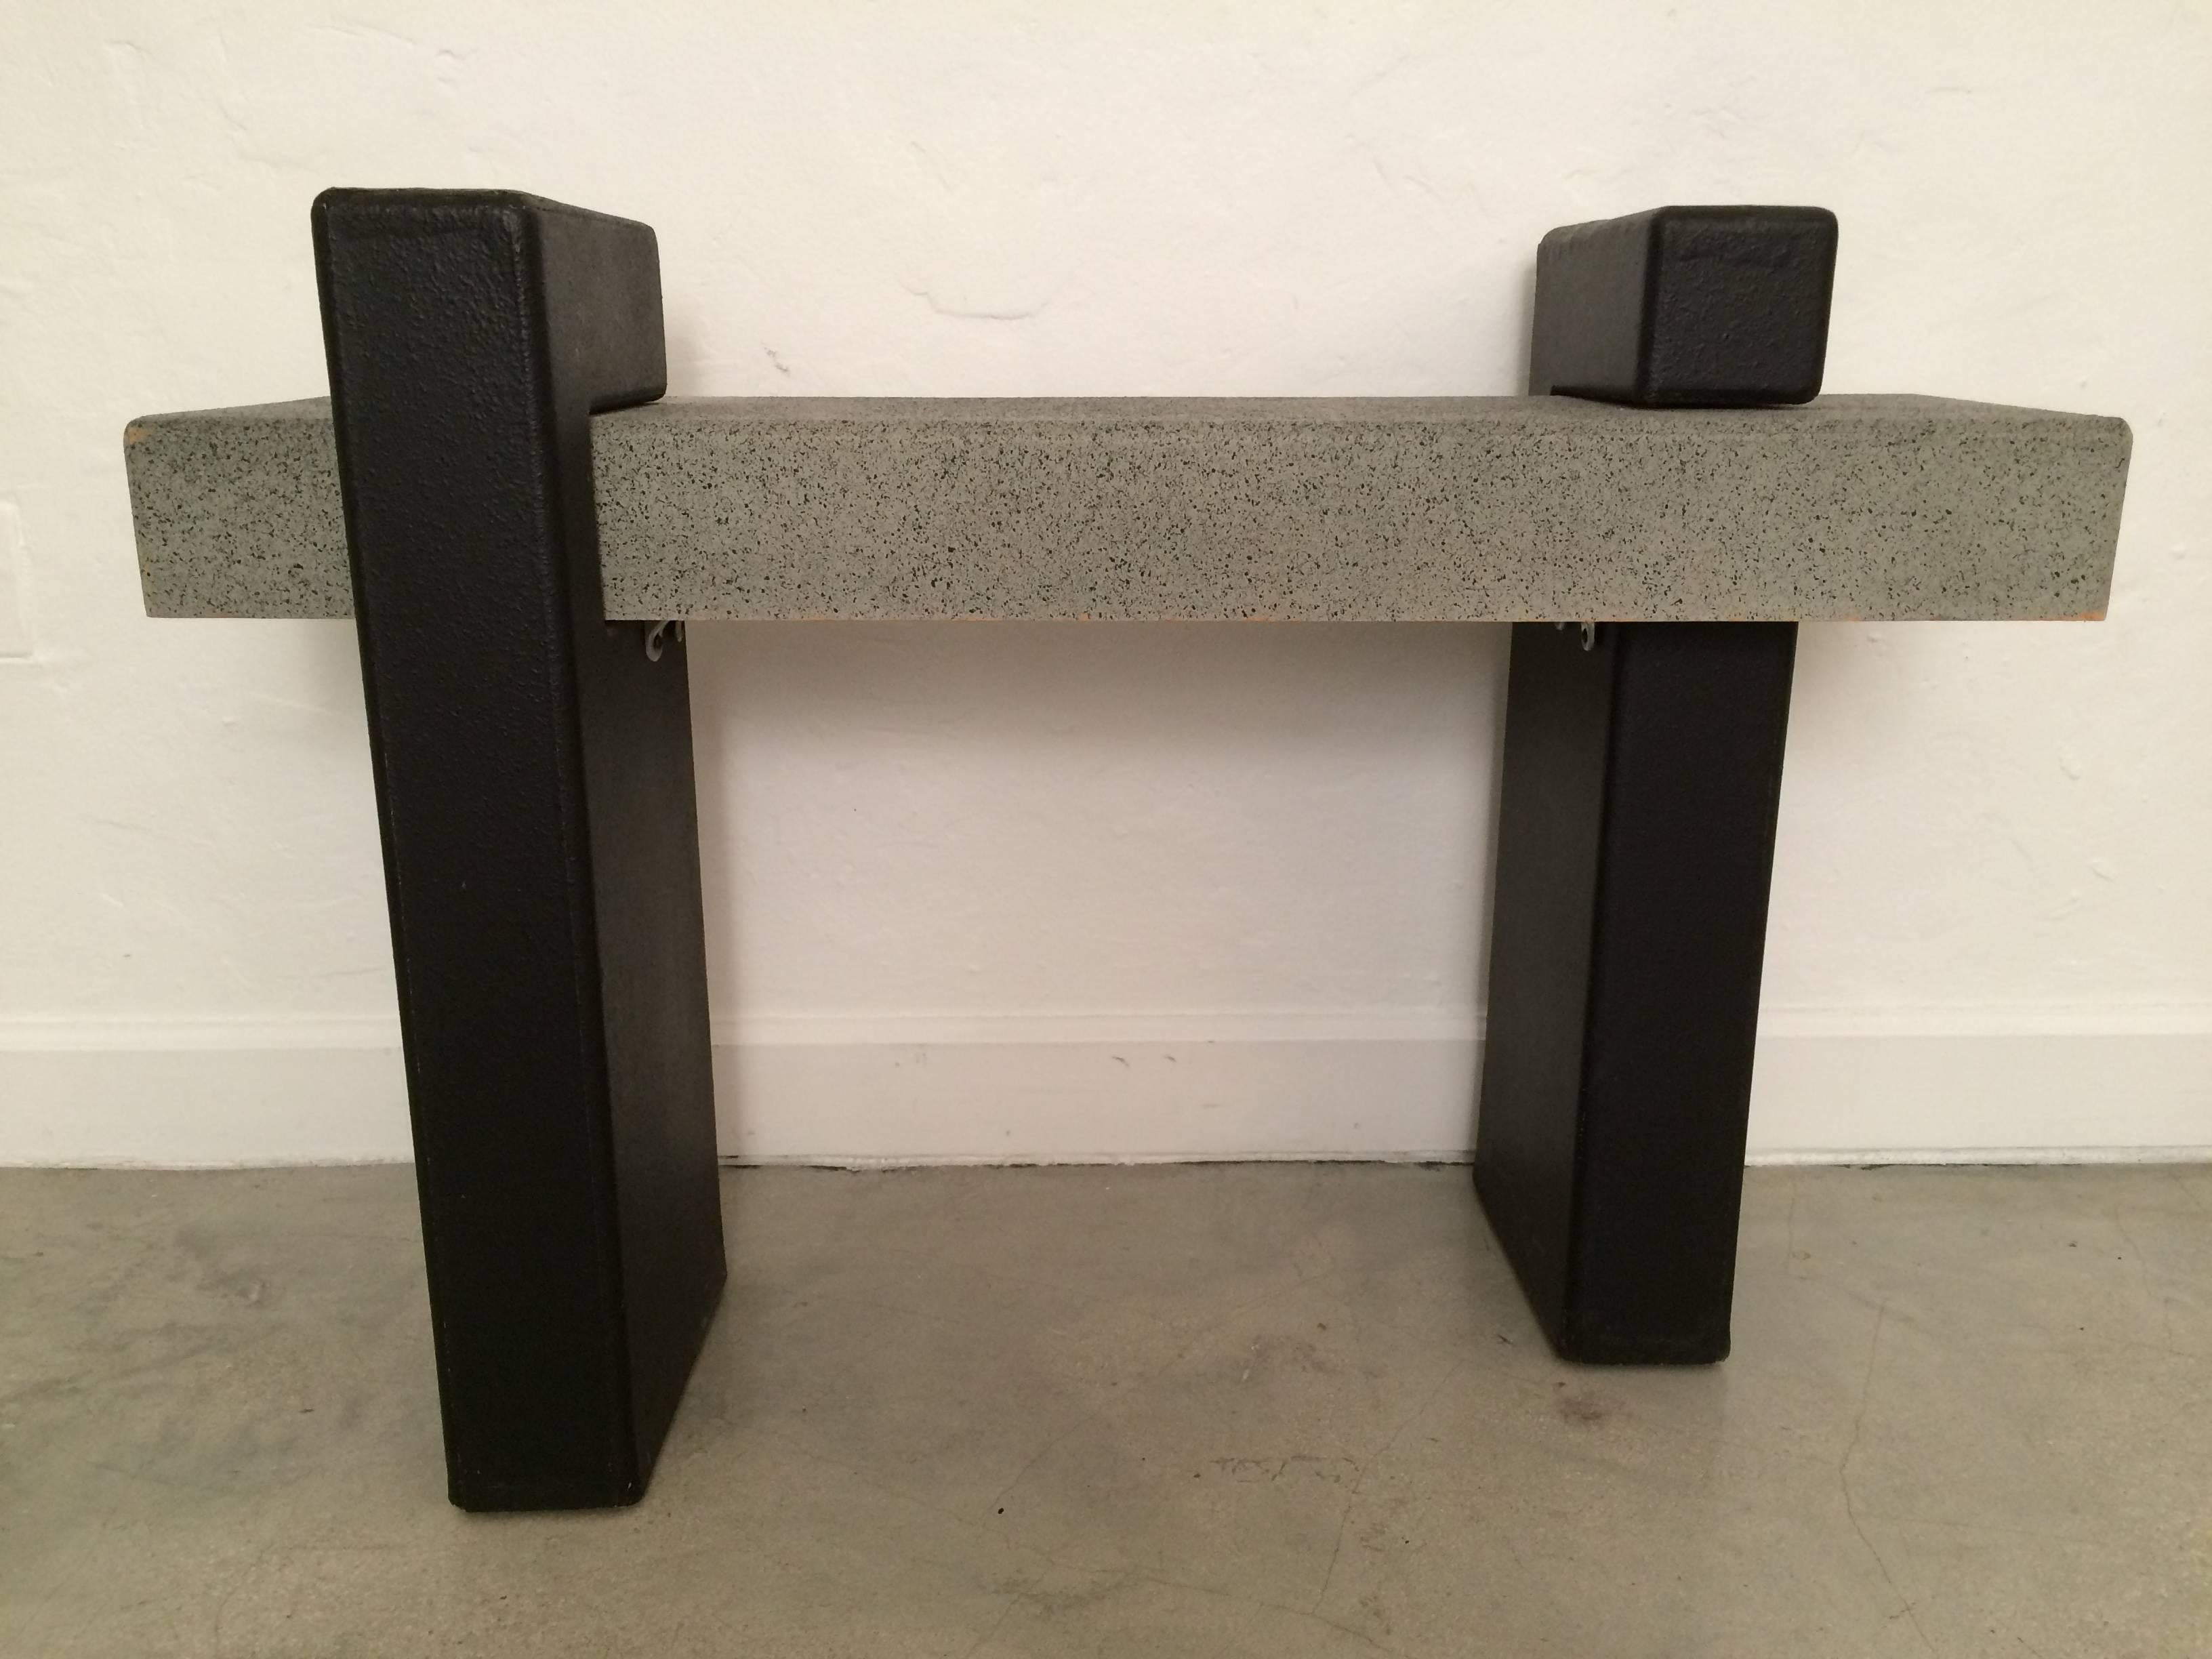 Postmodern grey and black and grey console table, 1980s. Table could have glass top fabricated.